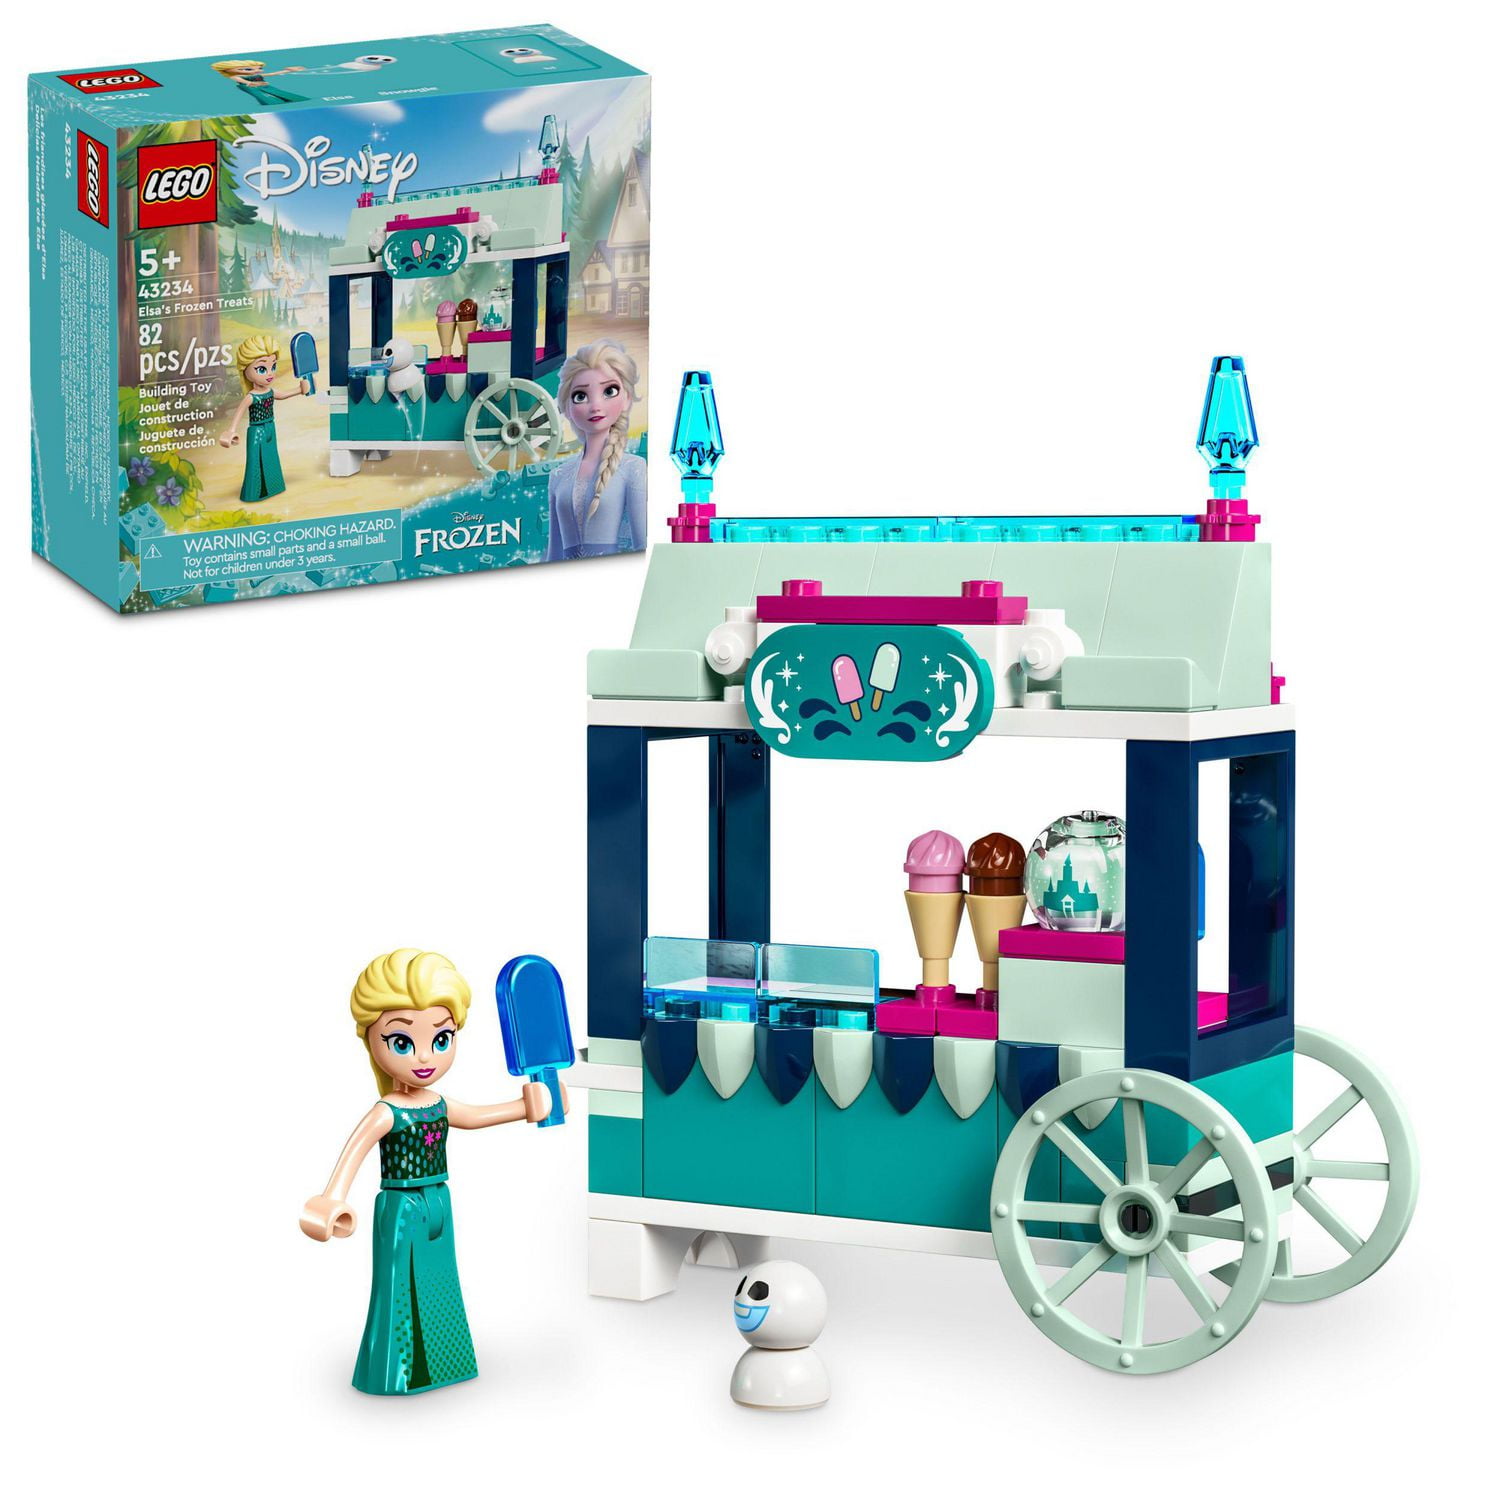 Disney Frozen Anna and Elsa's Magical Carousel Building Toy Set, 1